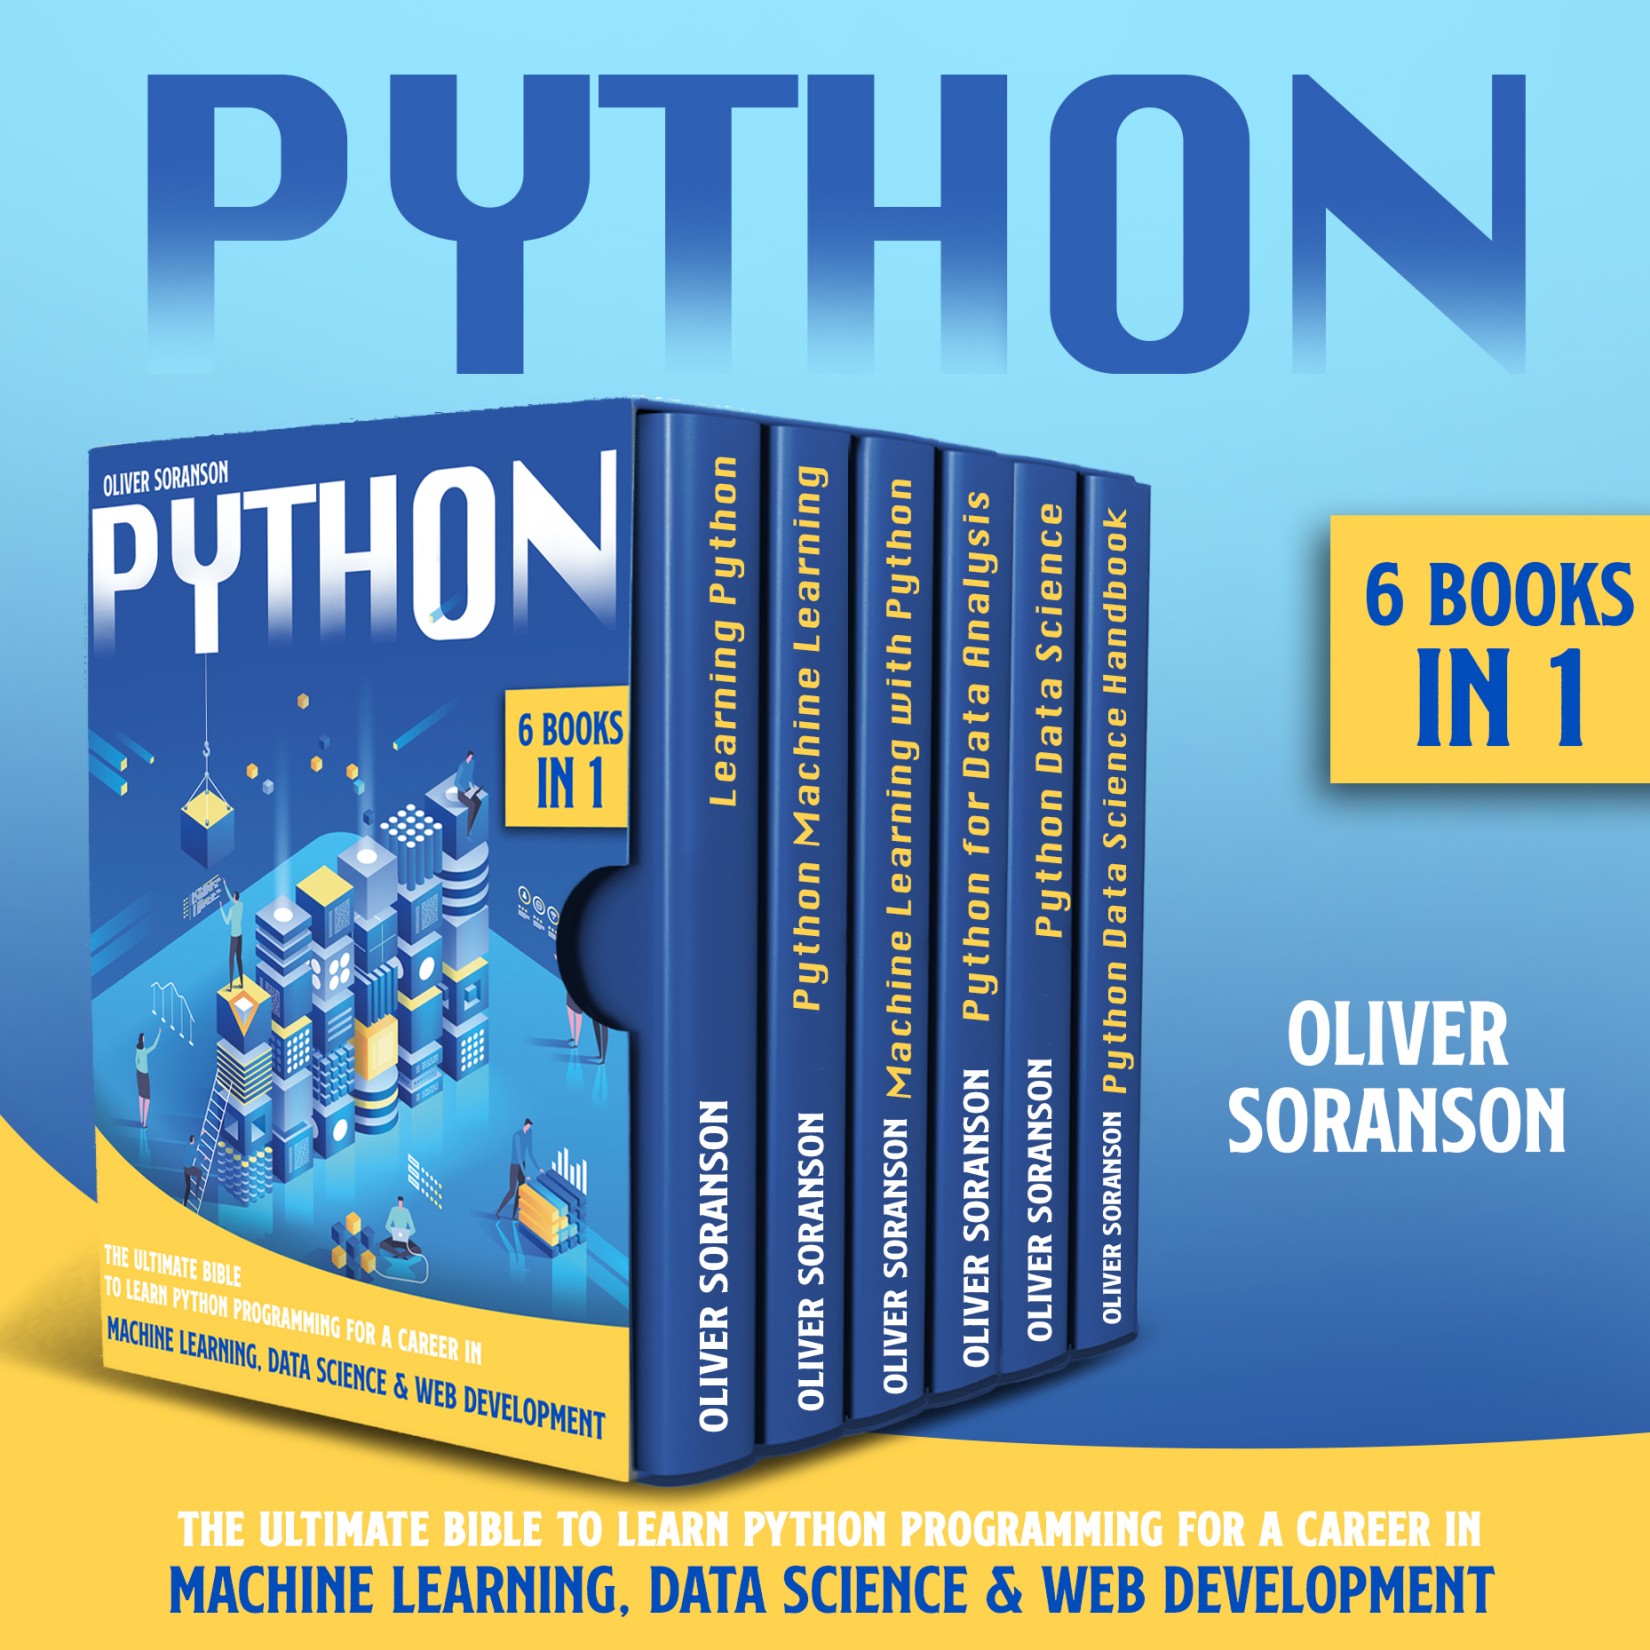 Python: 6 Books in 1: The Ultimate Bible to Learn Python Programming for a Career in Machine Learning, Data Science & Web Development.